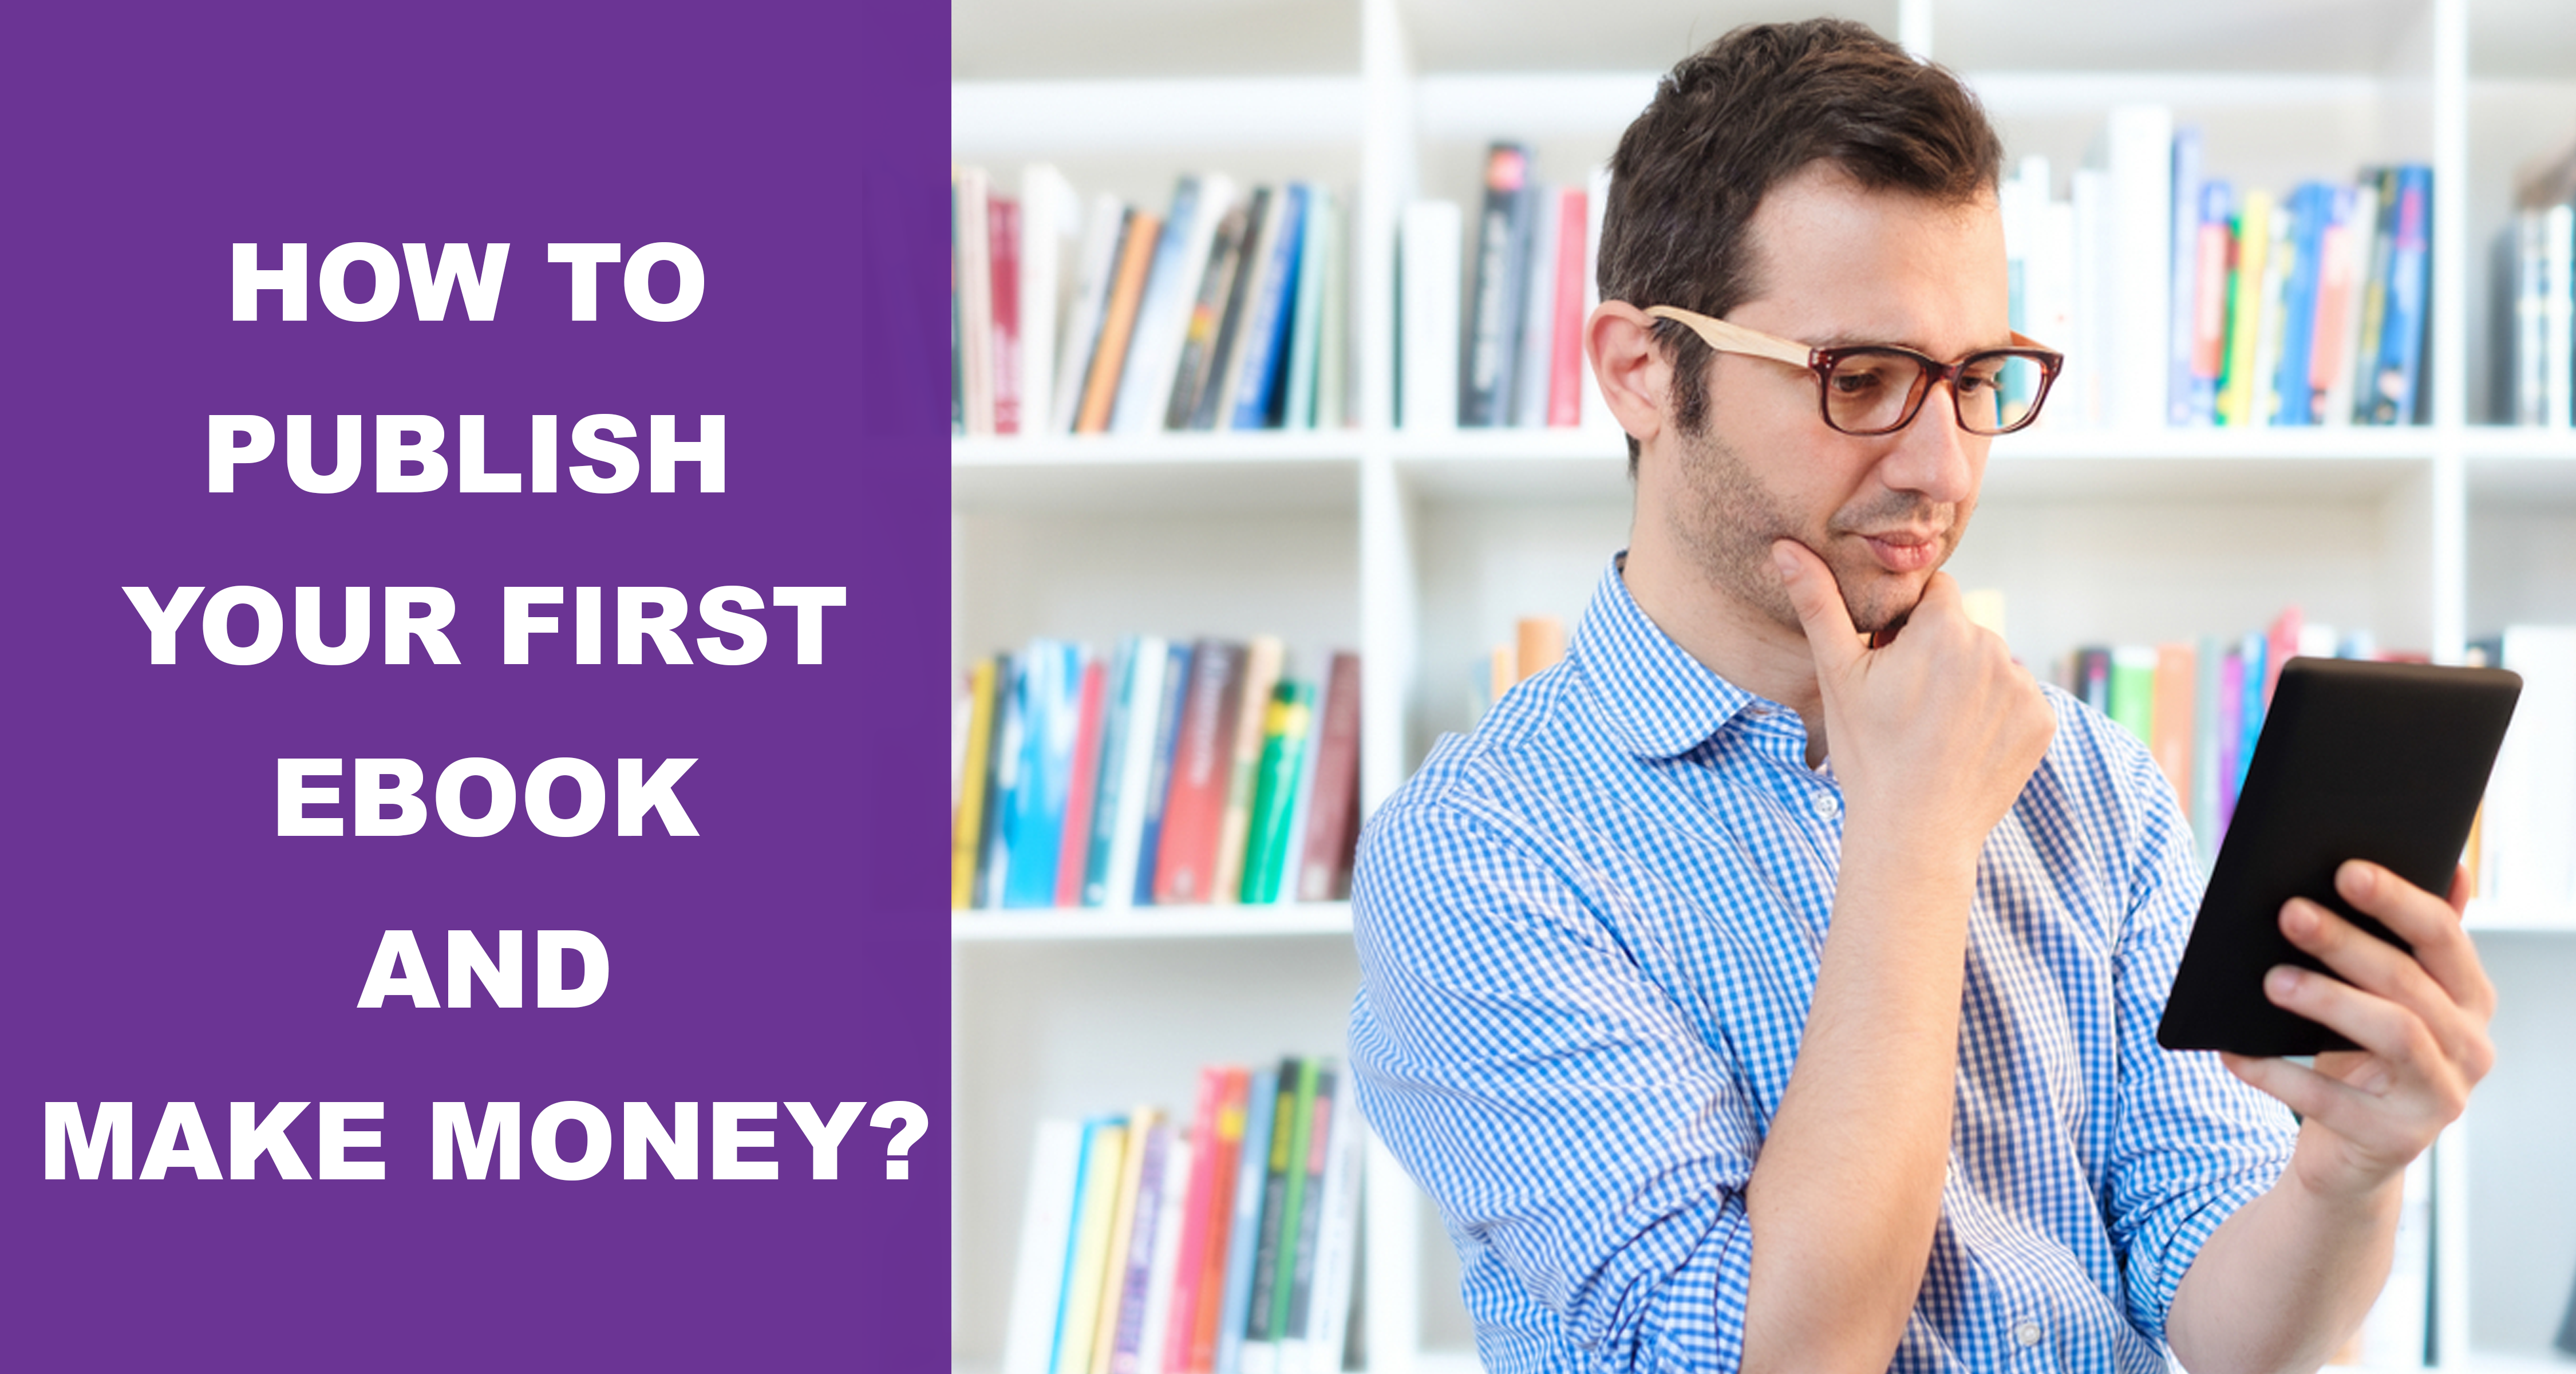 How To Publish Your First eBook And Make Money